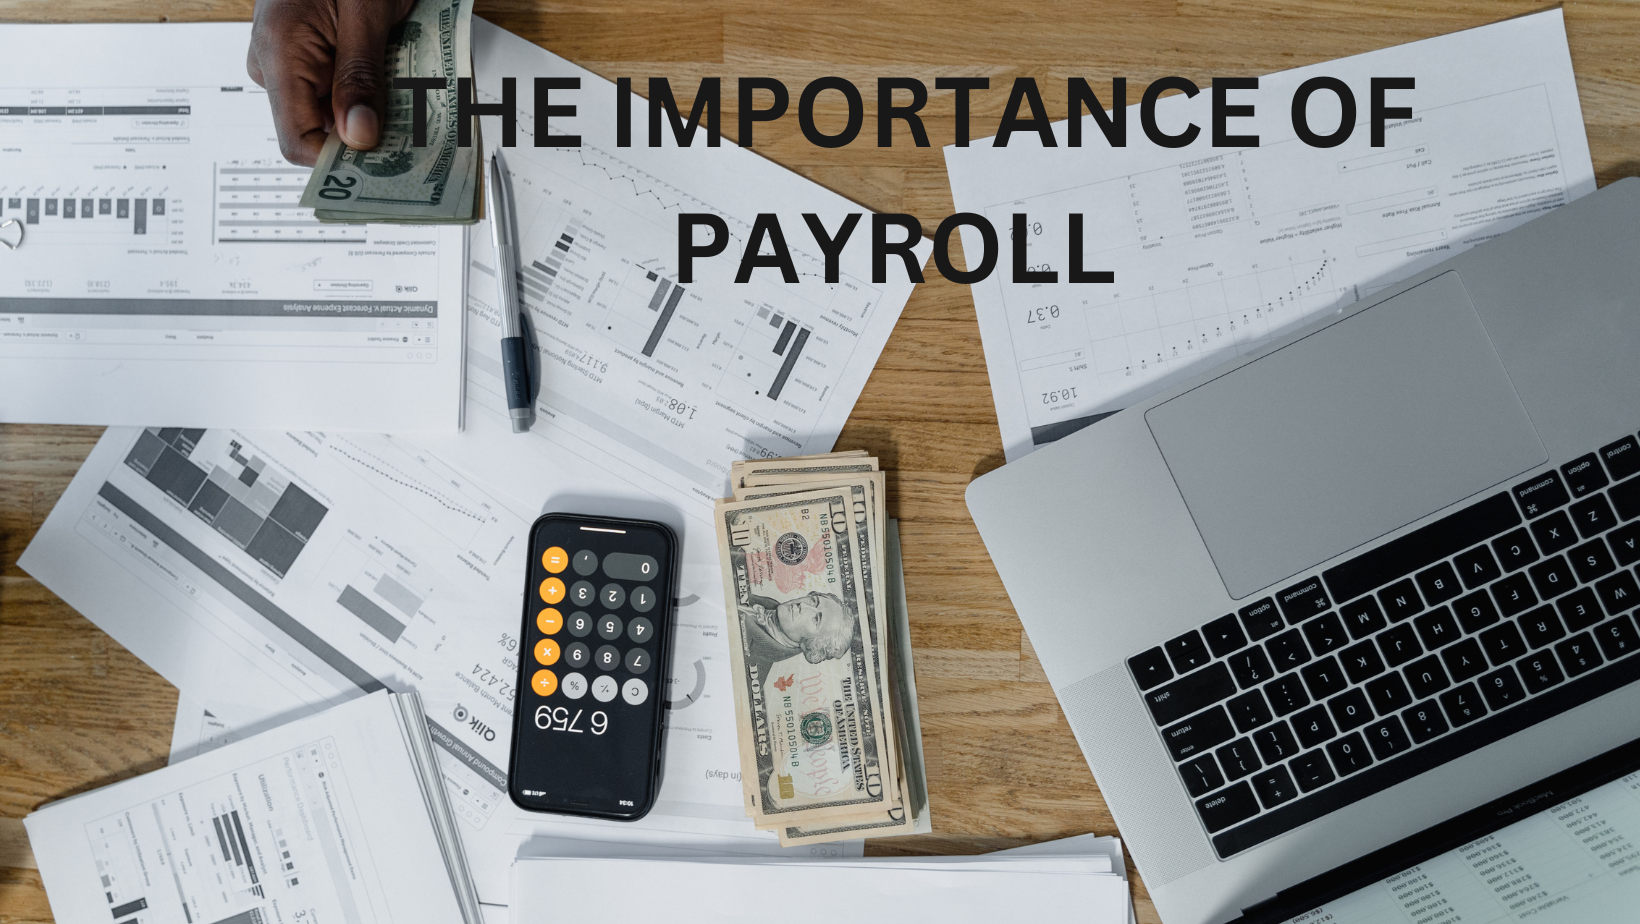 alt = "importance of payroll for businesses"